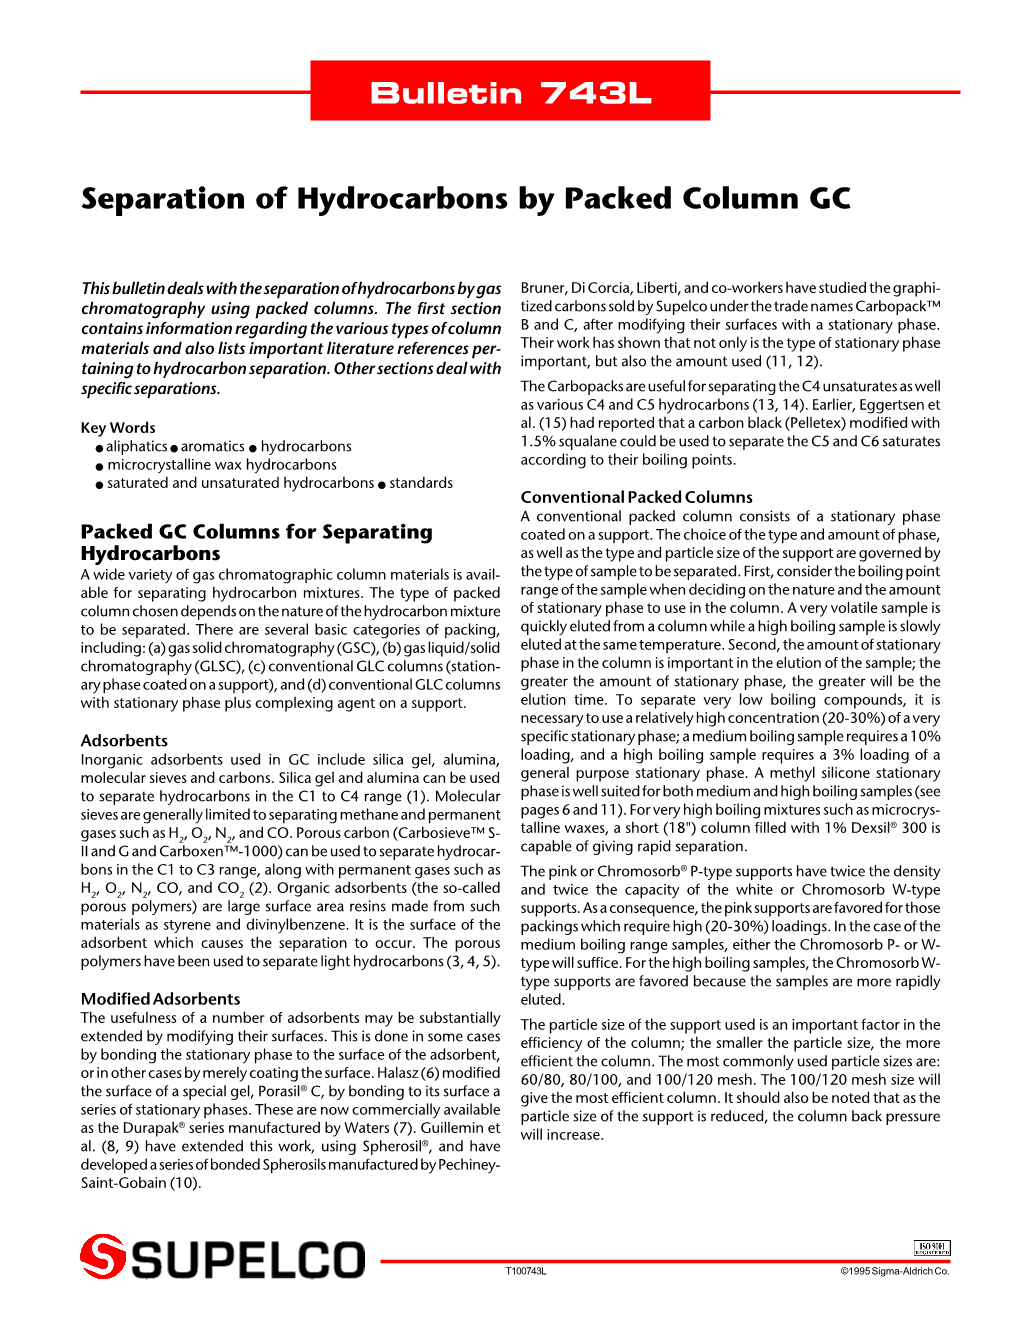 Bulletin 743L Separation of Hydrocarbons by Packed Column GC